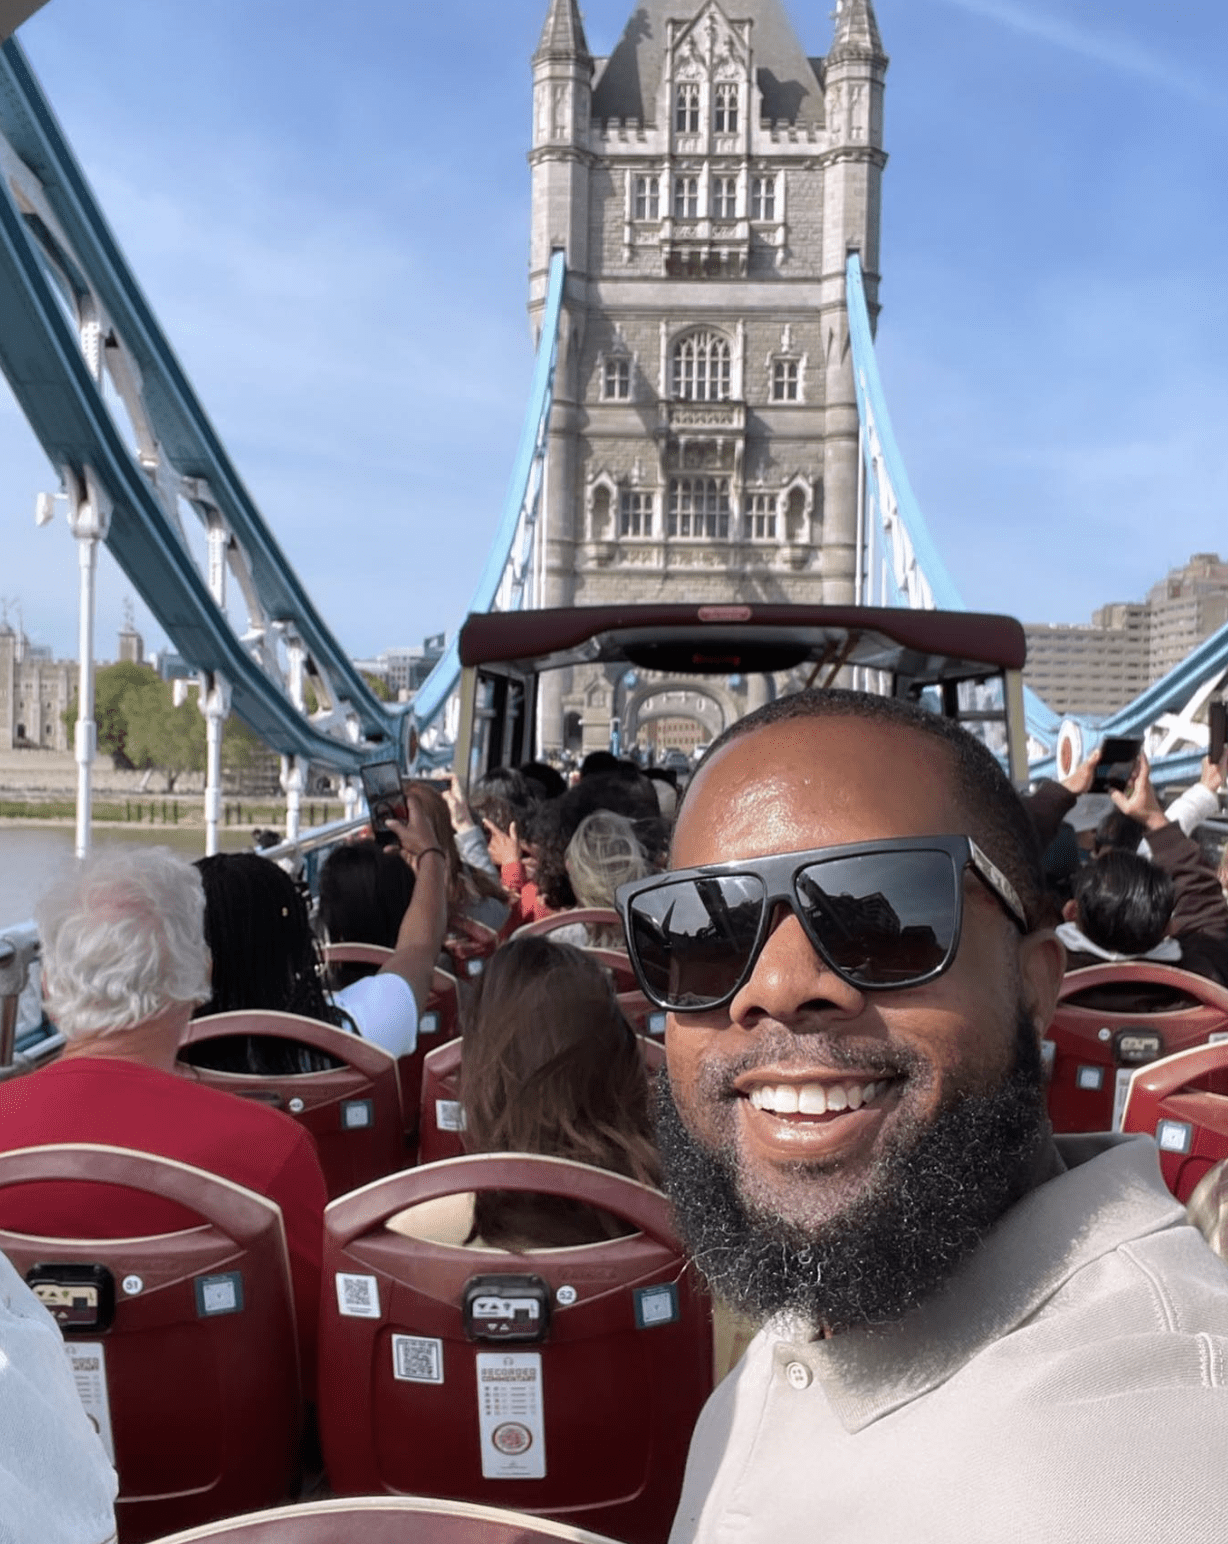 Photo shows a selfie of Principal Brian Riddick on one of his travel trips. He is on a tour bus in front of a historical building.